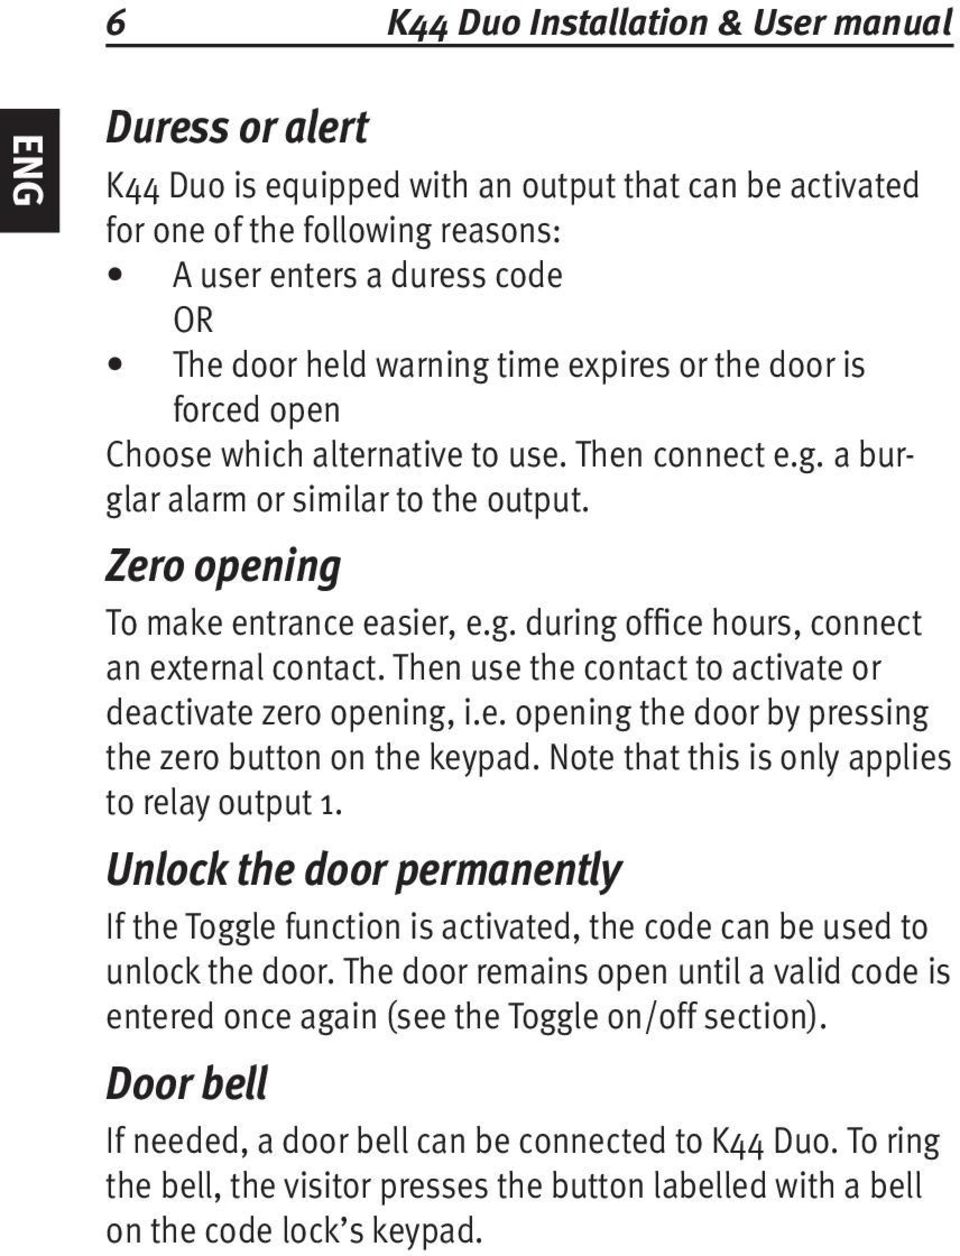 Then use the contact to activate or deactivate zero opening, i.e. opening the door by pressing the zero button on the keypad. Note that this is only applies to relay output 1.